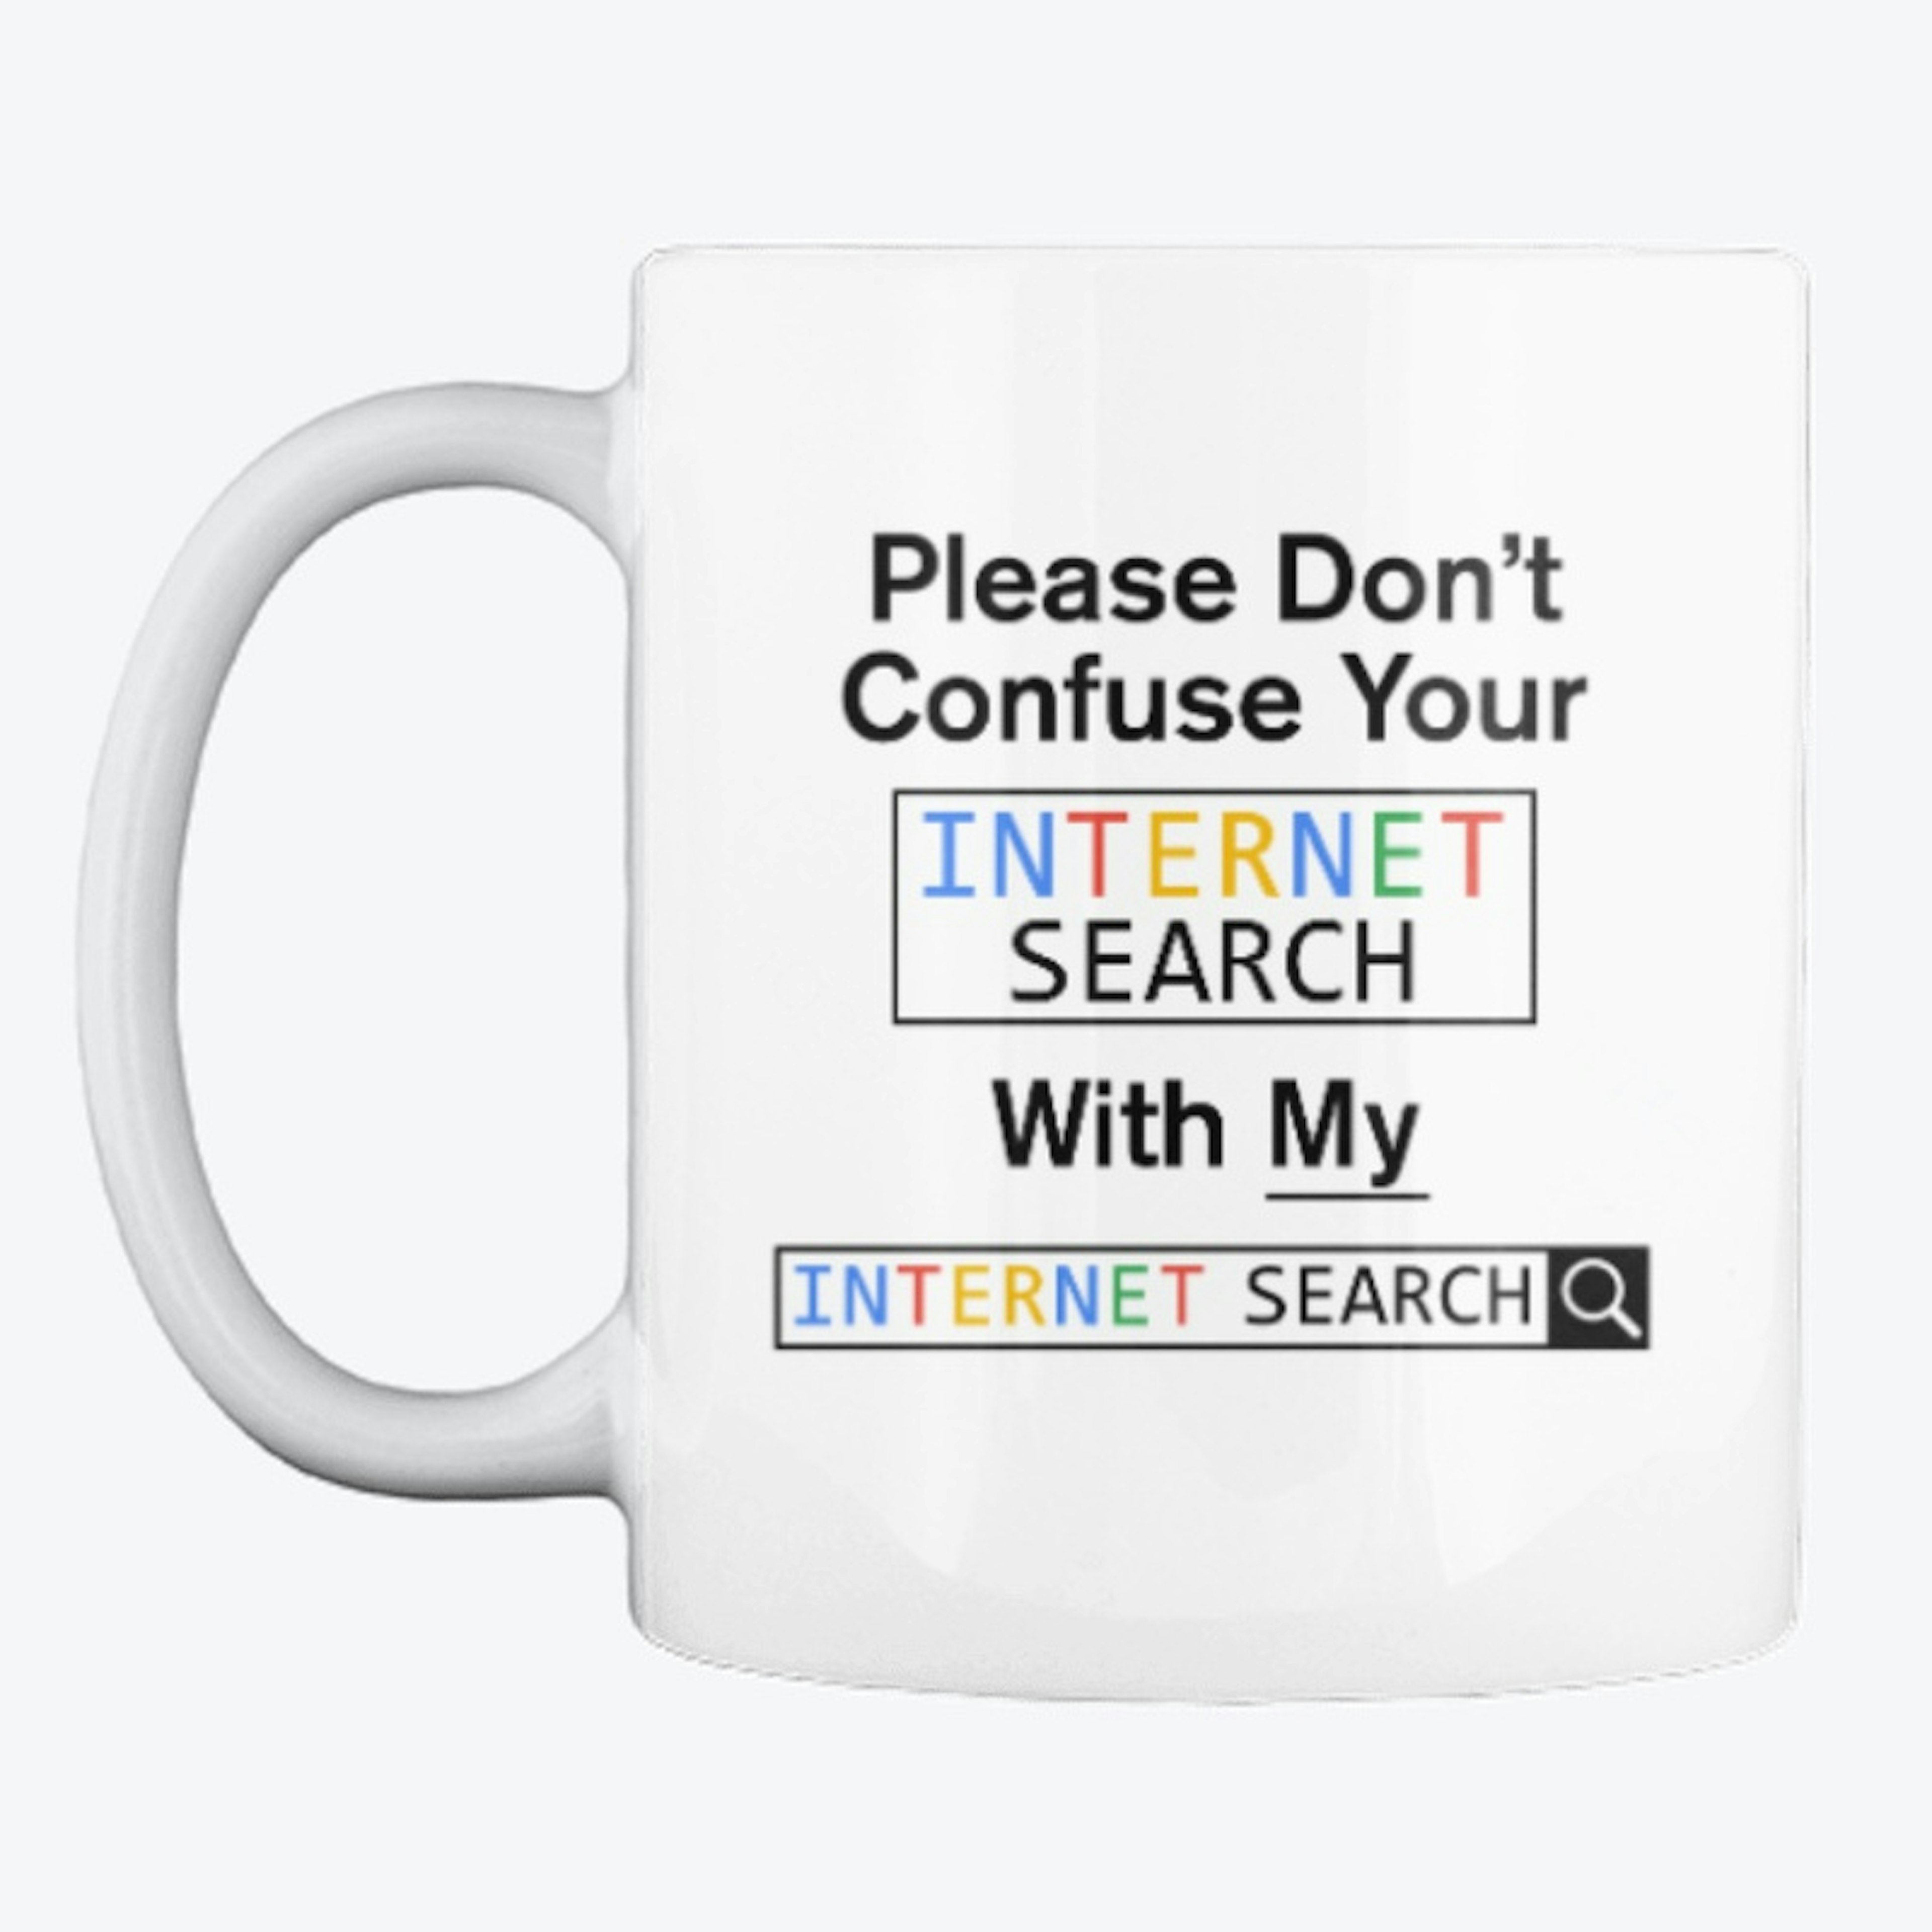 Don't Confuse Your Internet Search